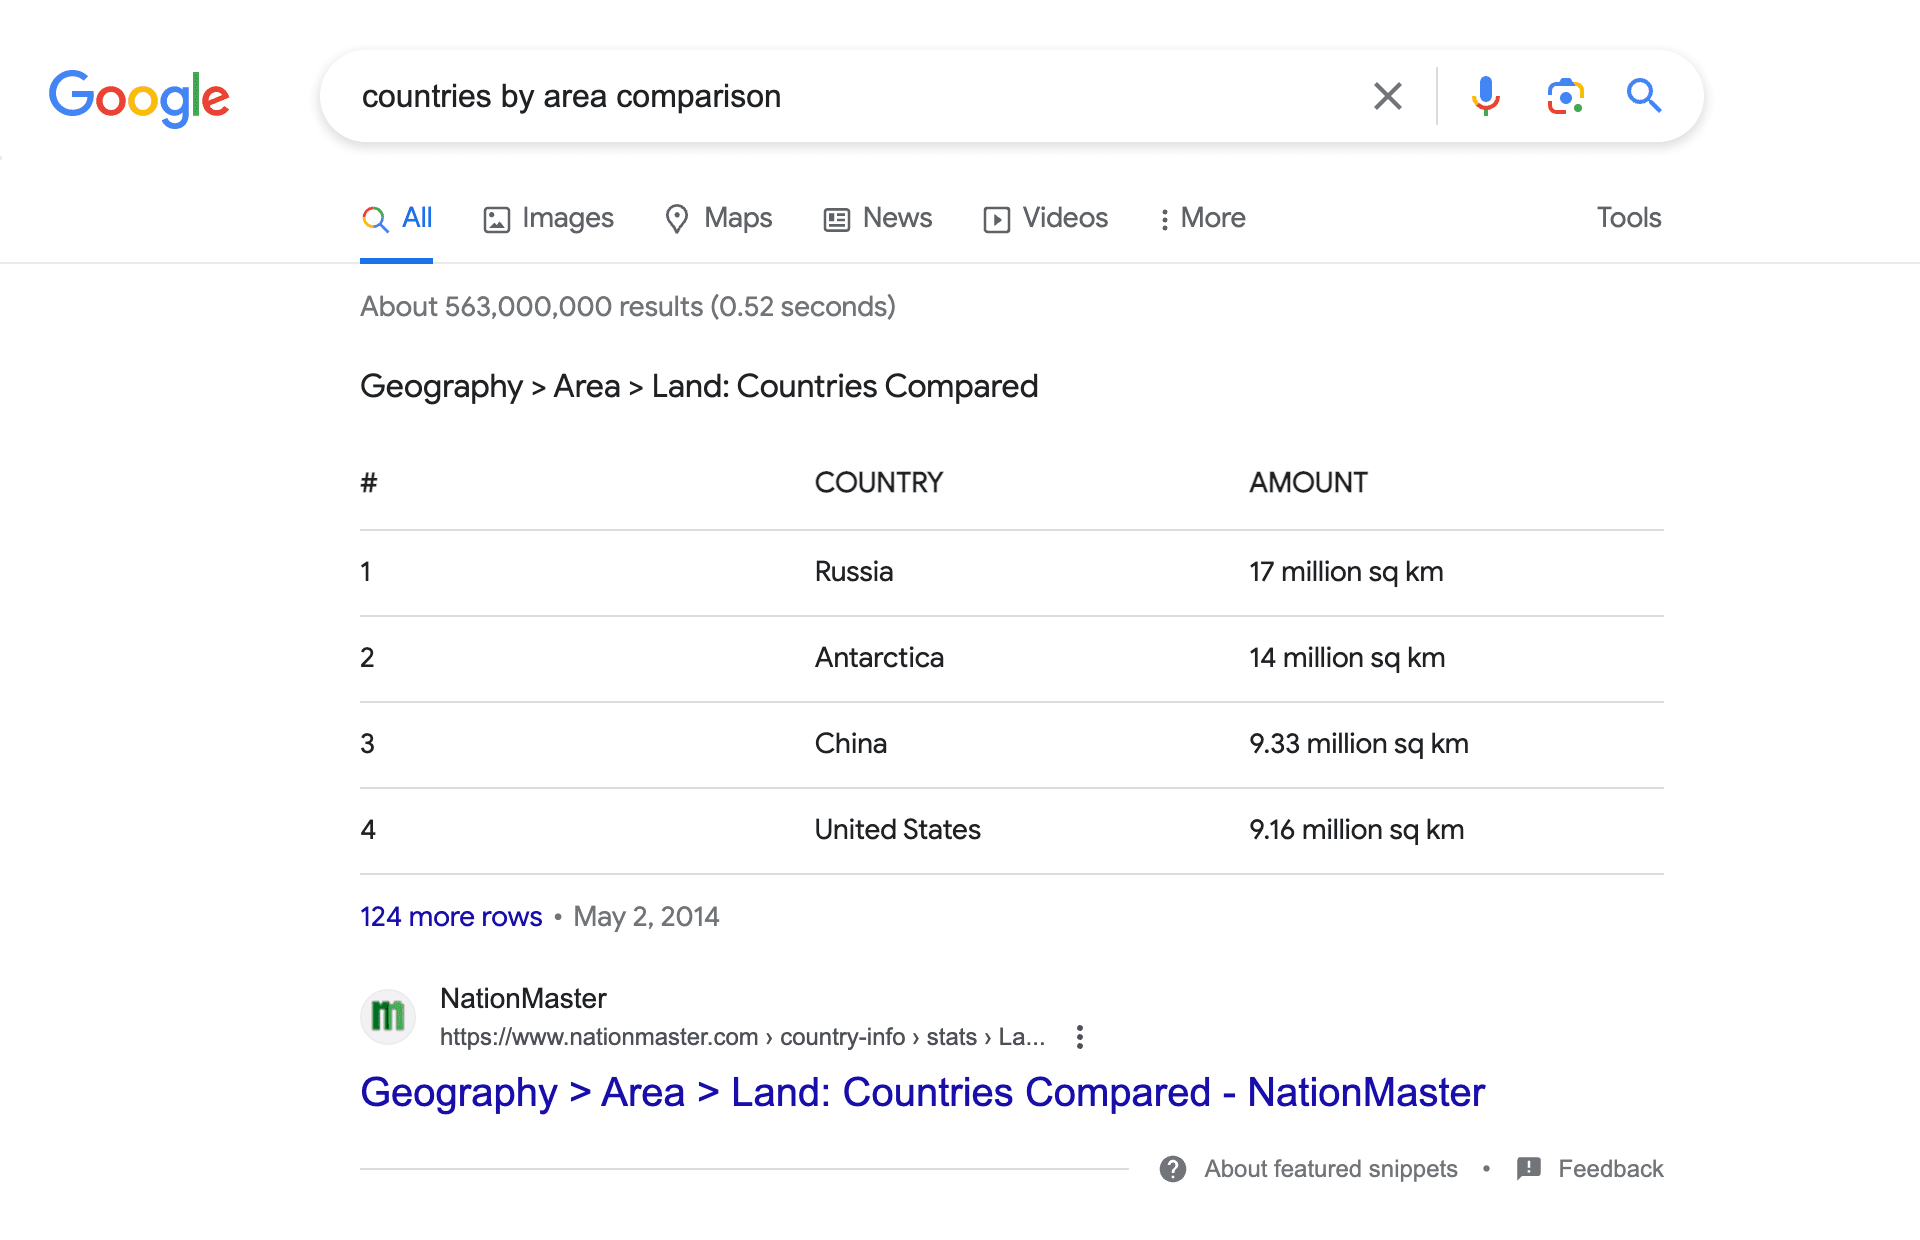 An example of a table in a featured snippet